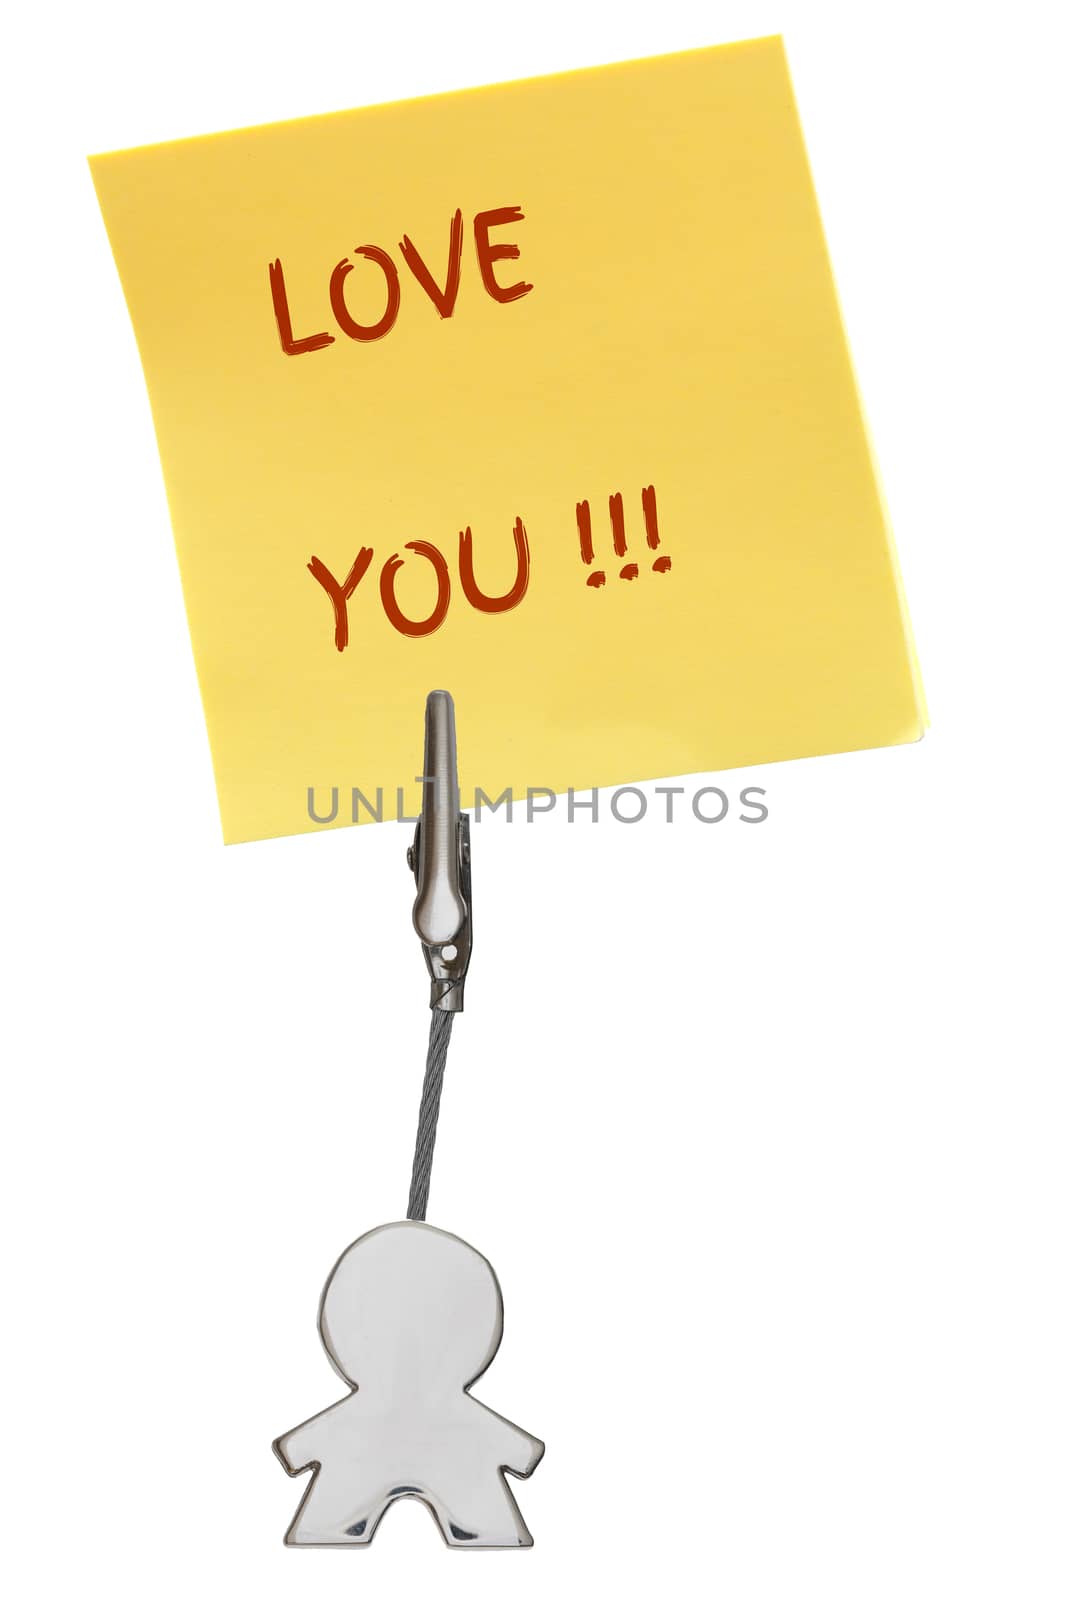 Man Figure Business Card Holder with yellow paper note LOVE YOU by asafaric